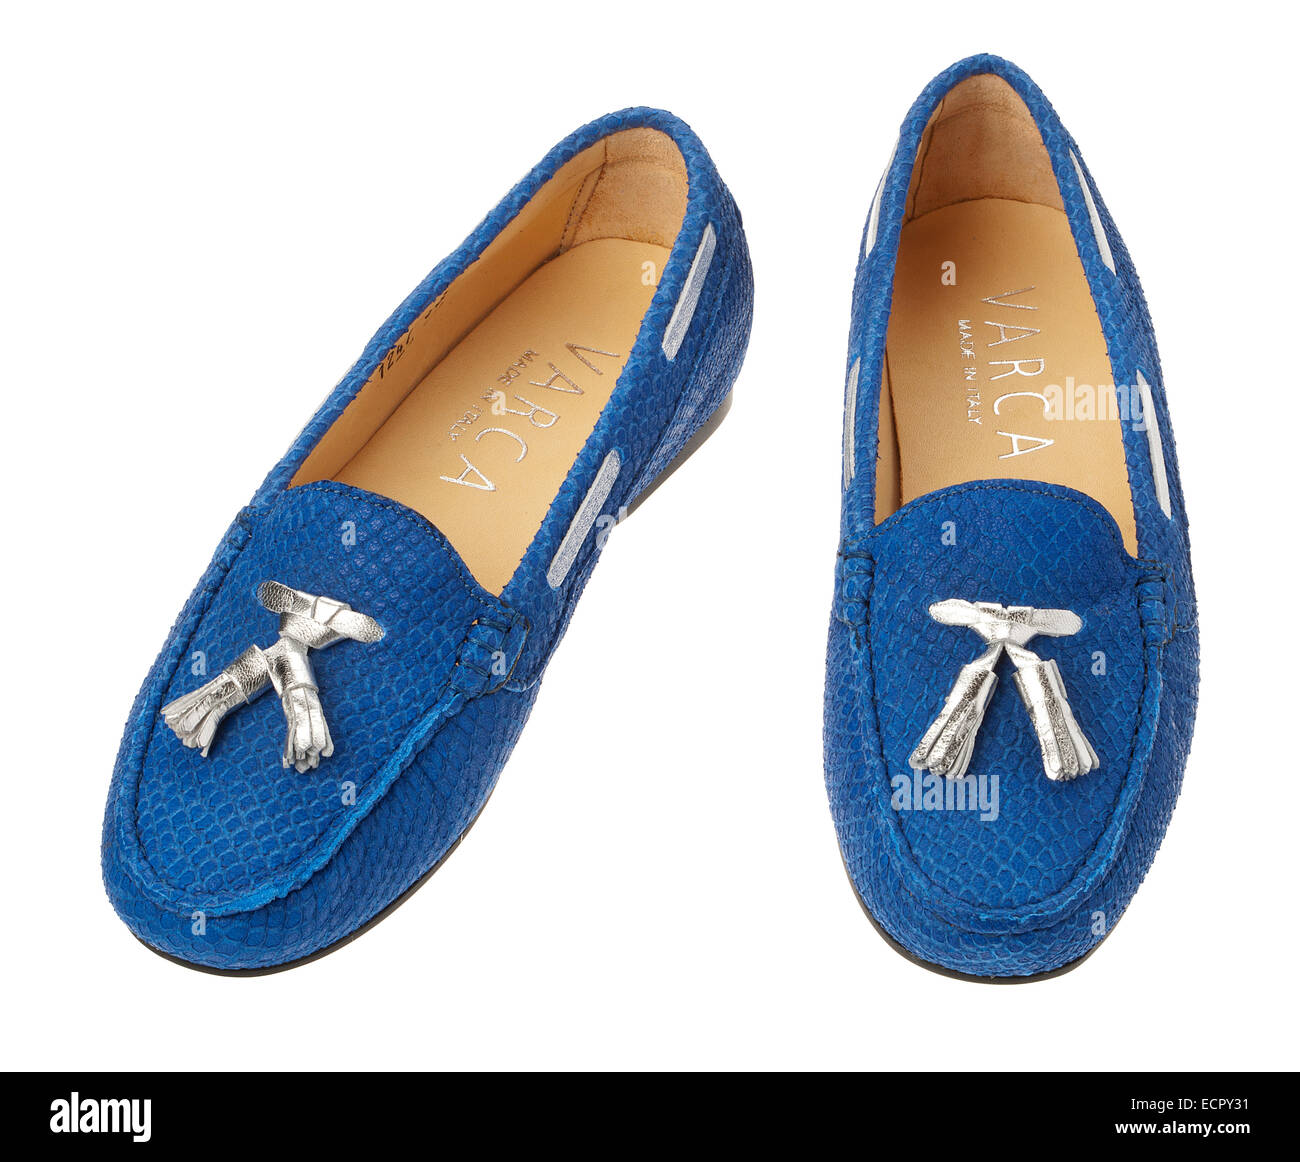 A pair of blue loafer shoes with silver tassels Stock Photo - Alamy